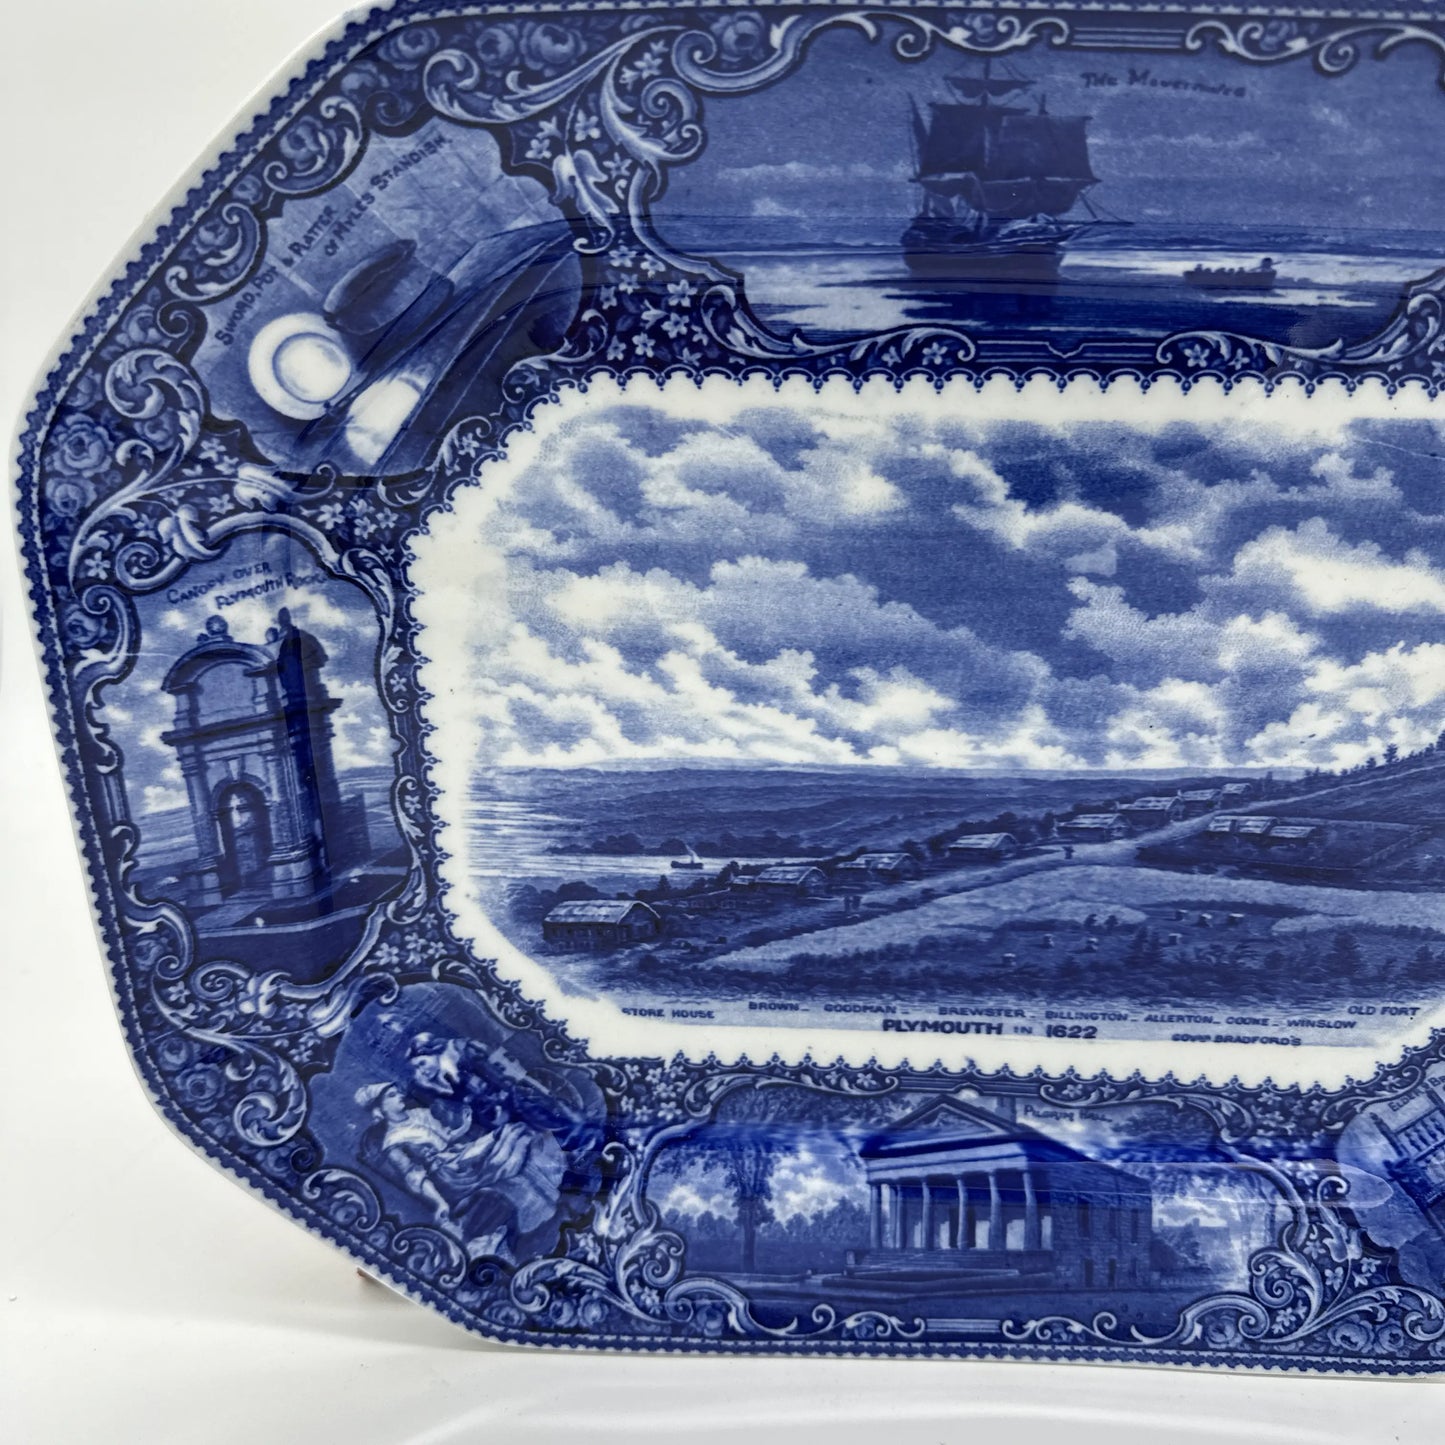 Large Historical Platter with several scenes of Plymouth in 1622 and after